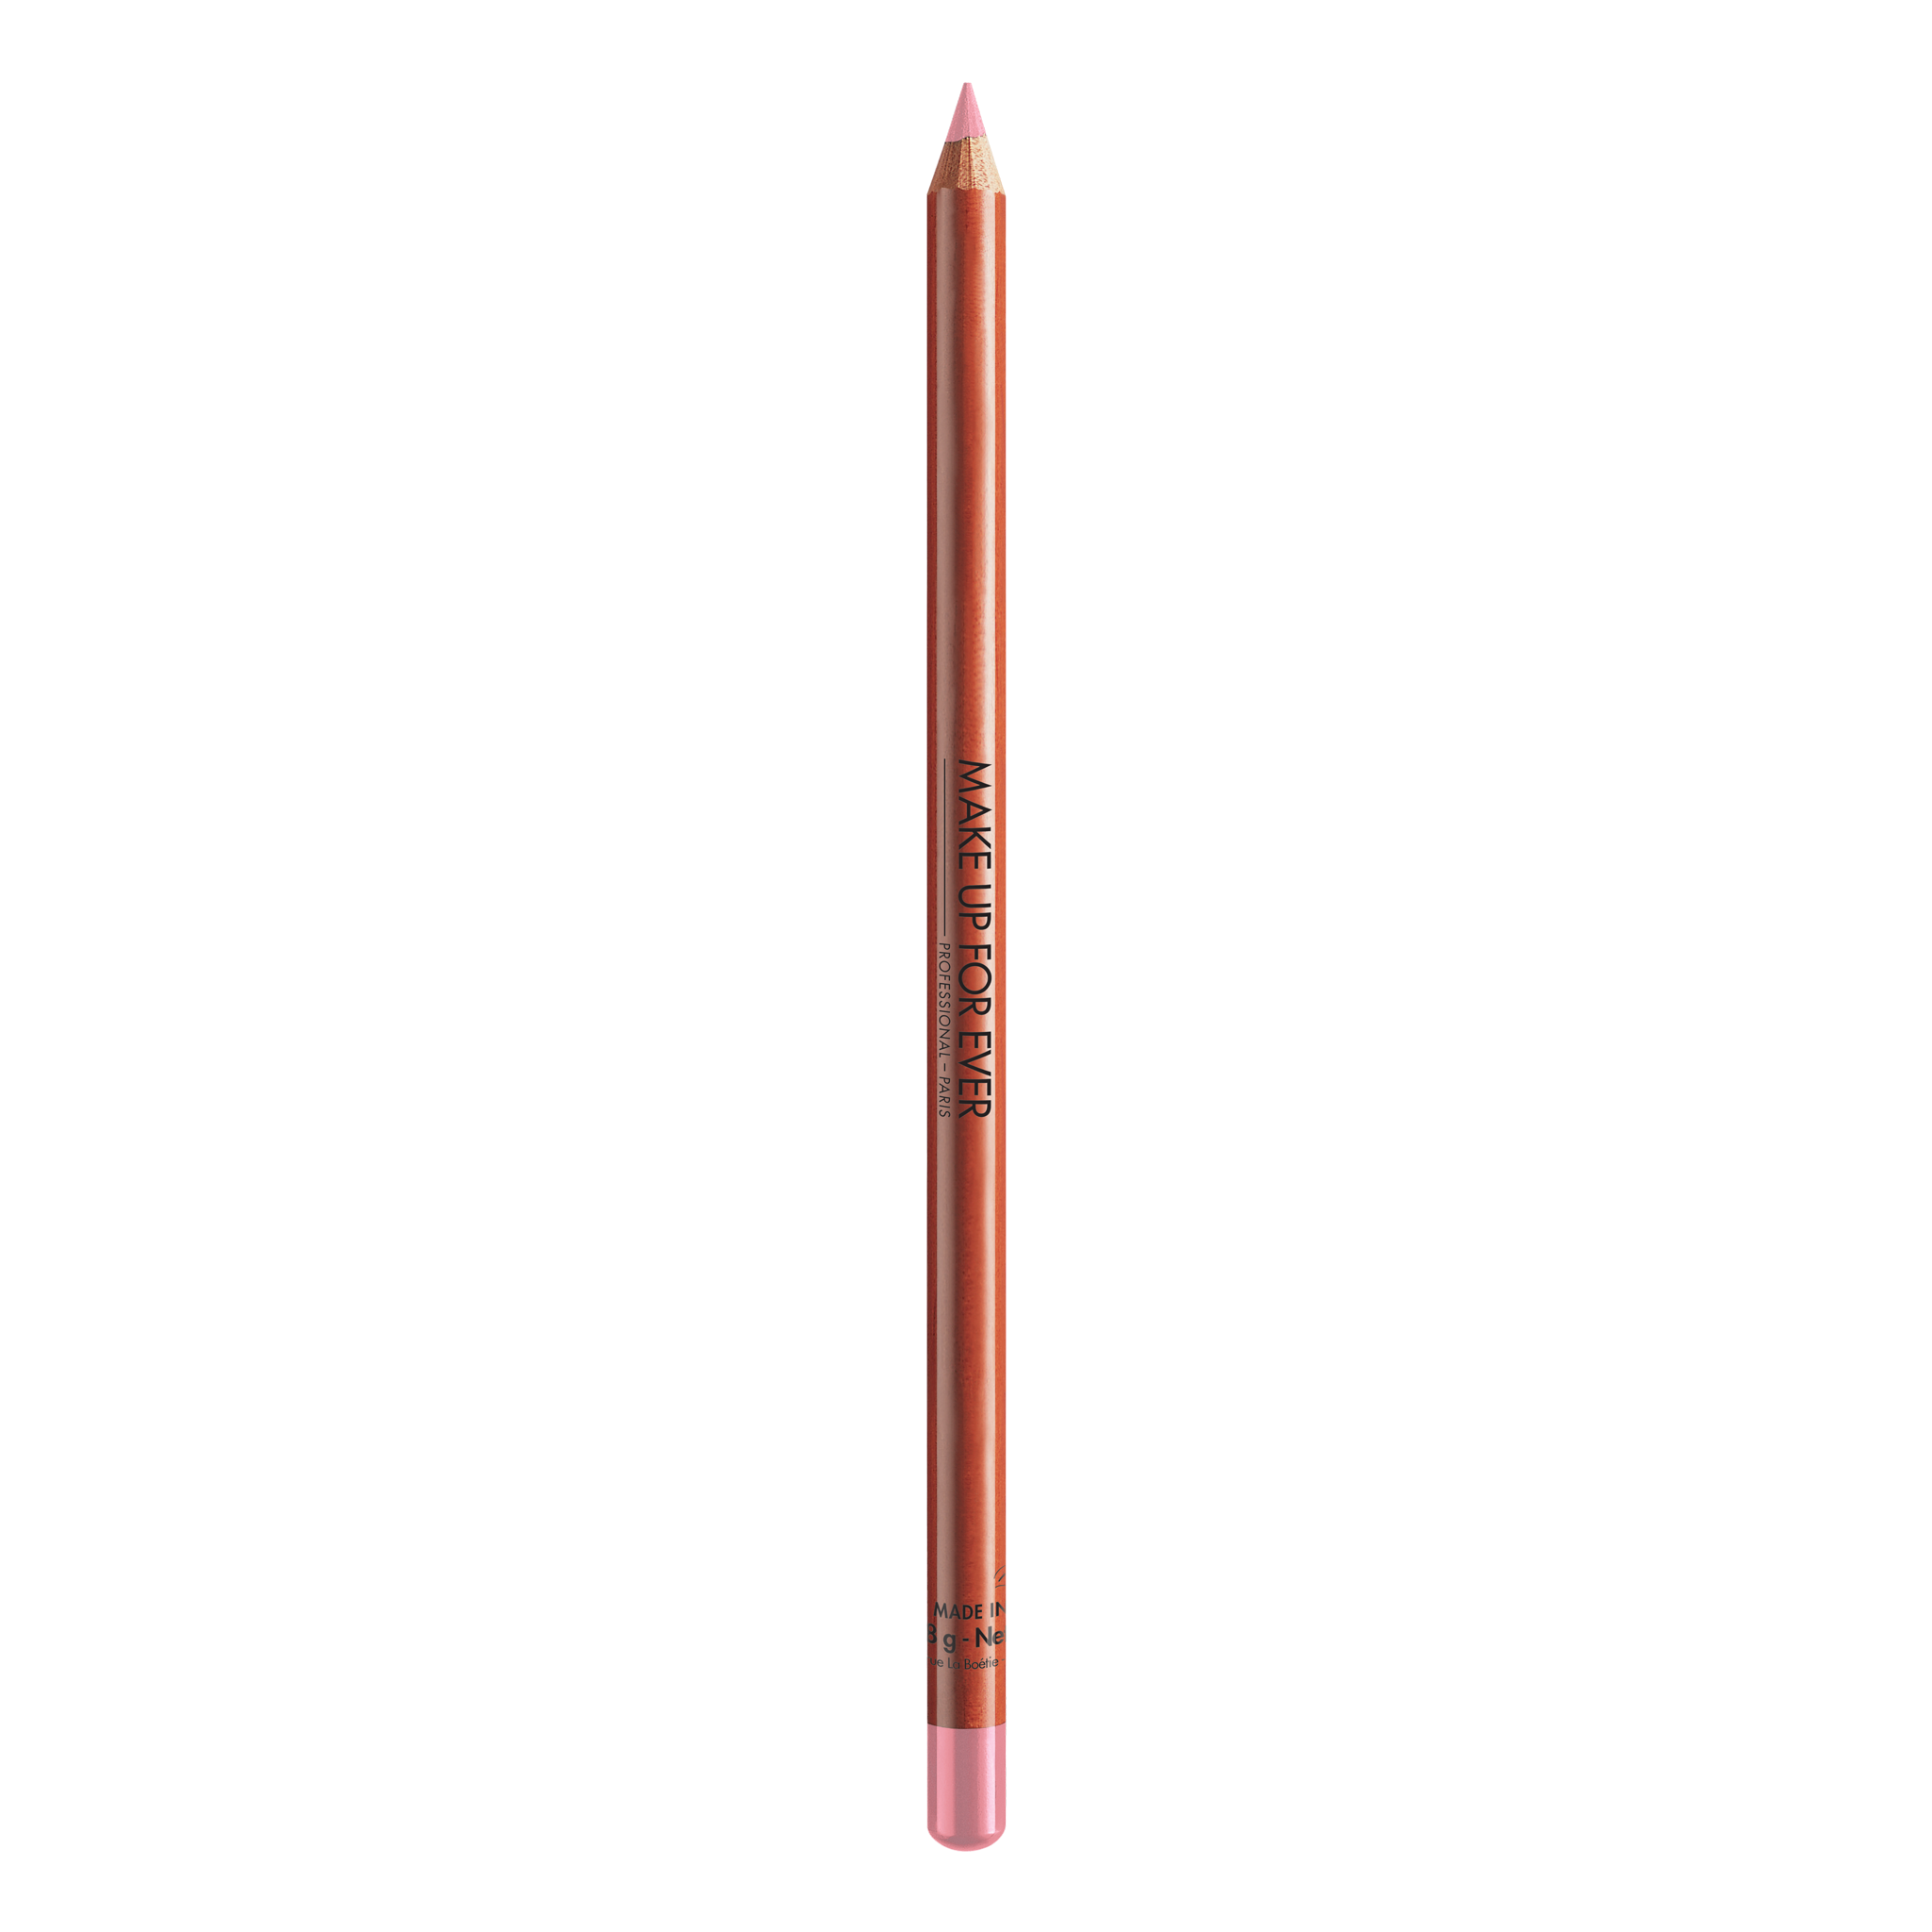 Tip Of Pencil Png - The Extra Long Lip Contours Lip Pencil Draws Precise, Even Lines That Remain Sharp For Hours. Make Up For Ever, Transparent background PNG HD thumbnail